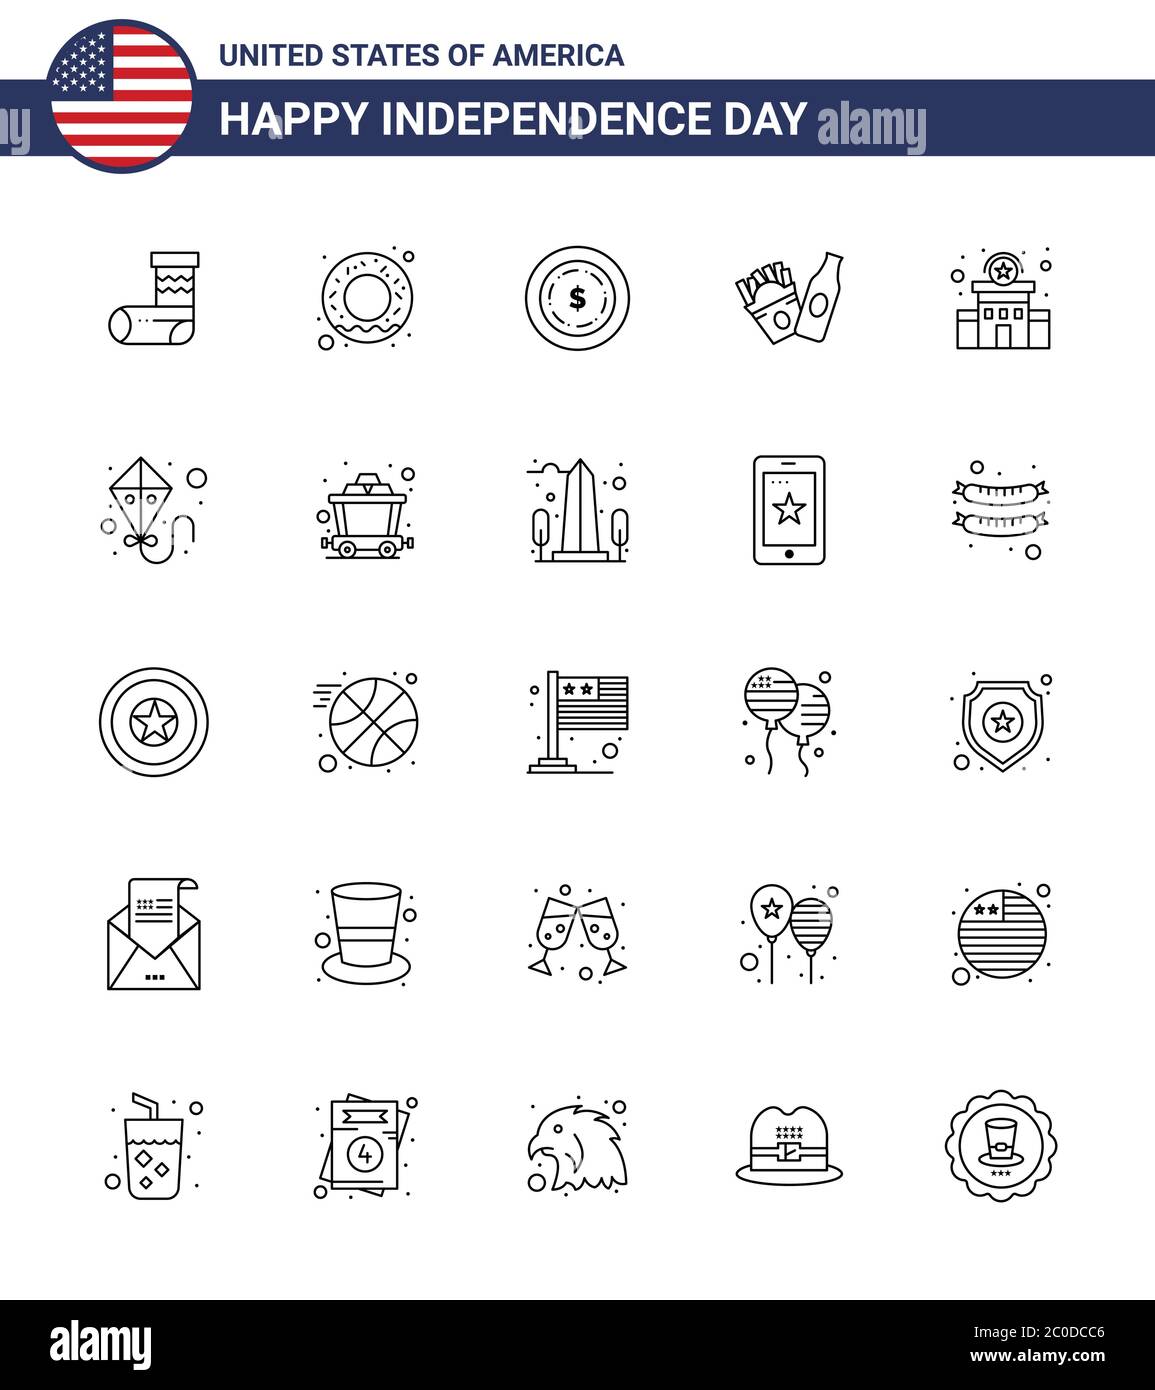 25 Line Signs for USA Independence Day kite; station; dollar; police; american Editable USA Day Vector Design Elements Stock Vector